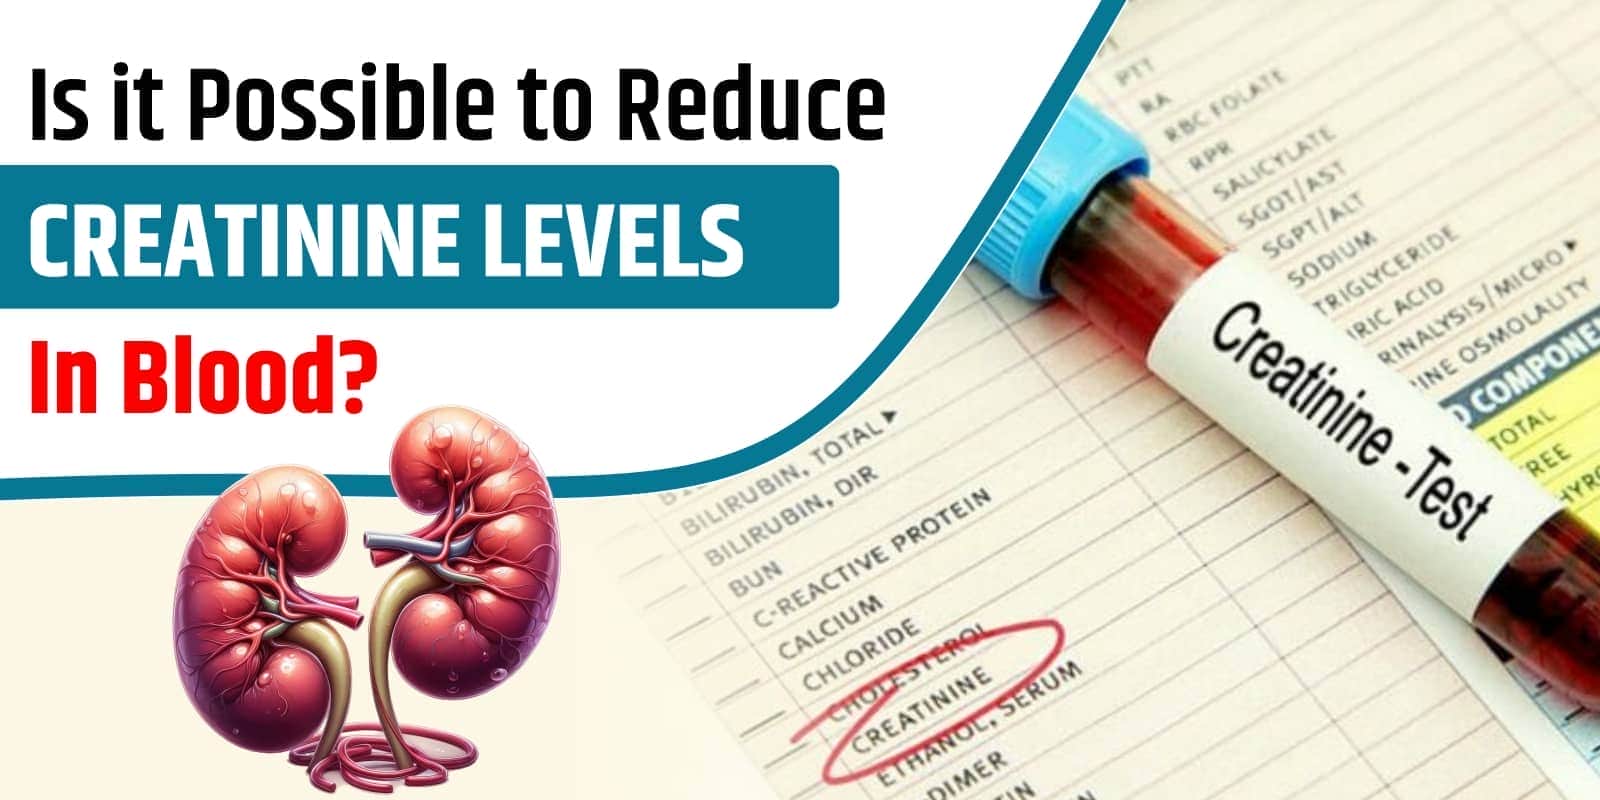 Is it Possible to Reduce Creatinine Levels in Blood?